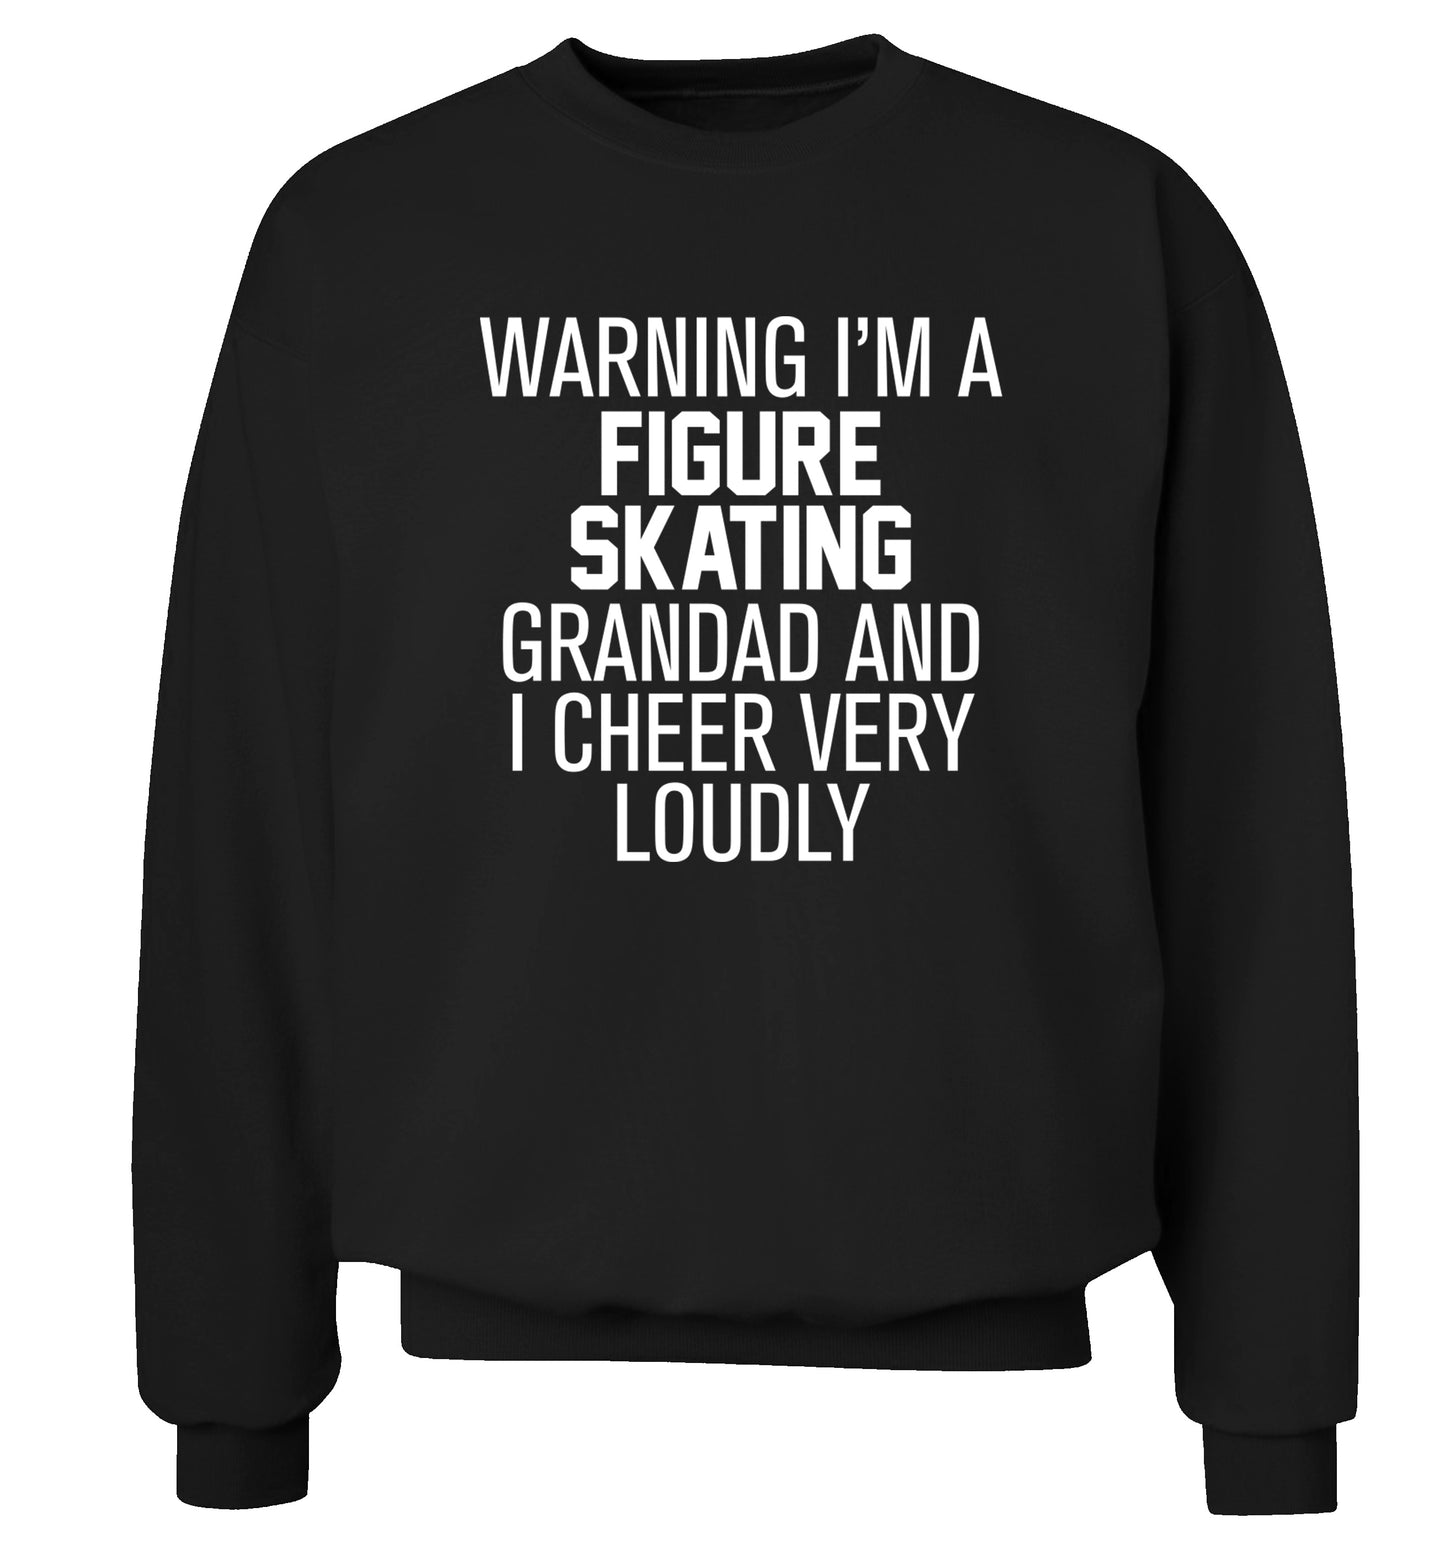 Warning I'm a figure skating grandad and I cheer very loudly Adult's unisexblack Sweater 2XL